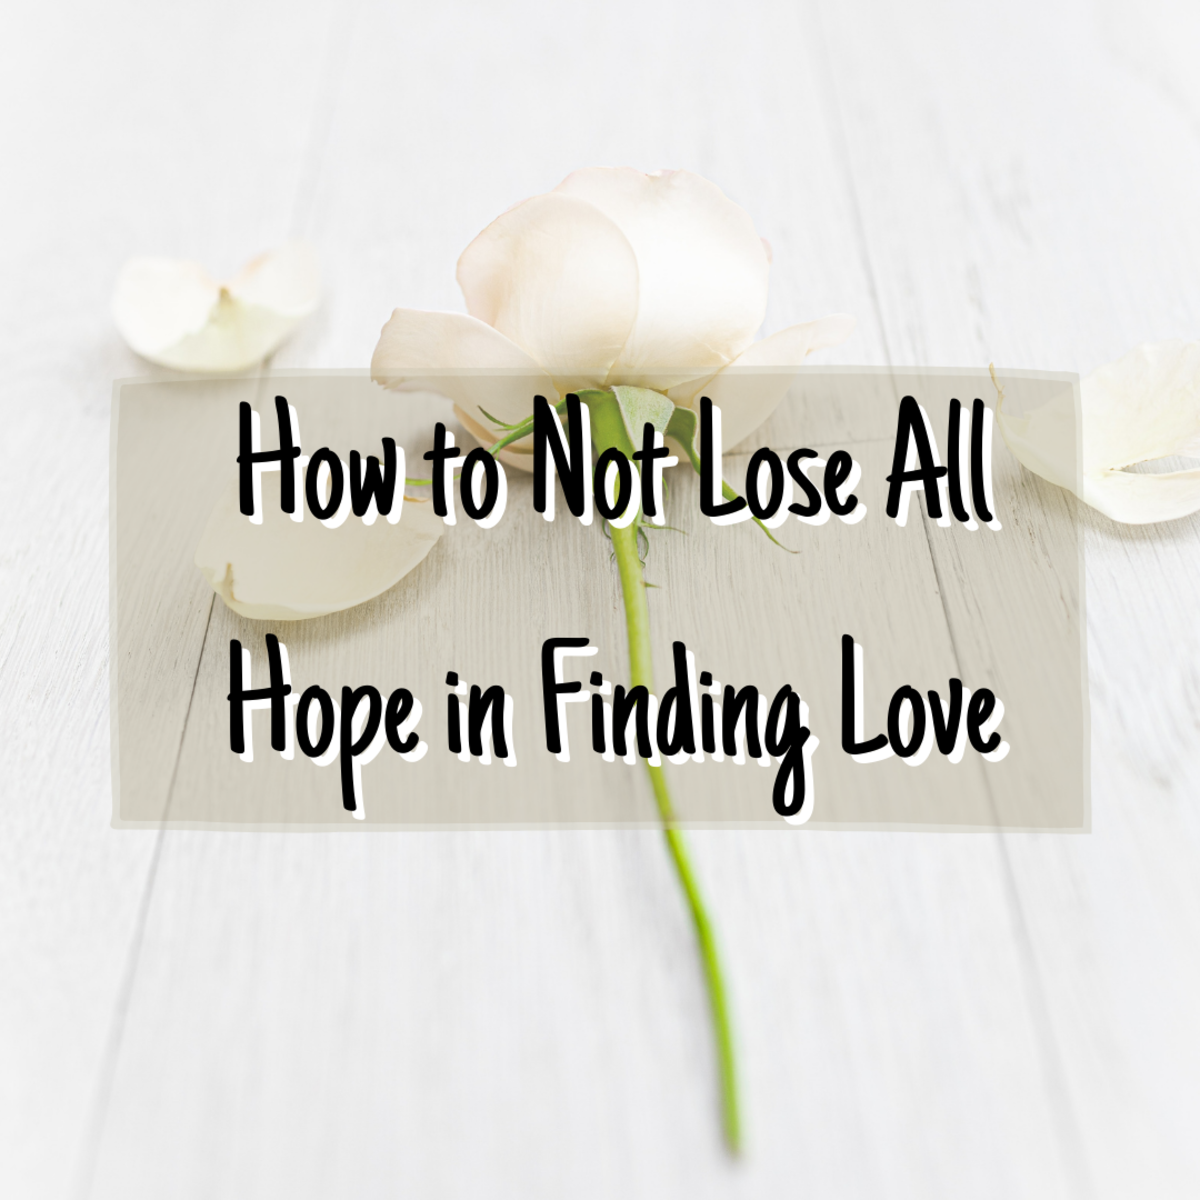 Are You Losing All Hope of Finding Love?